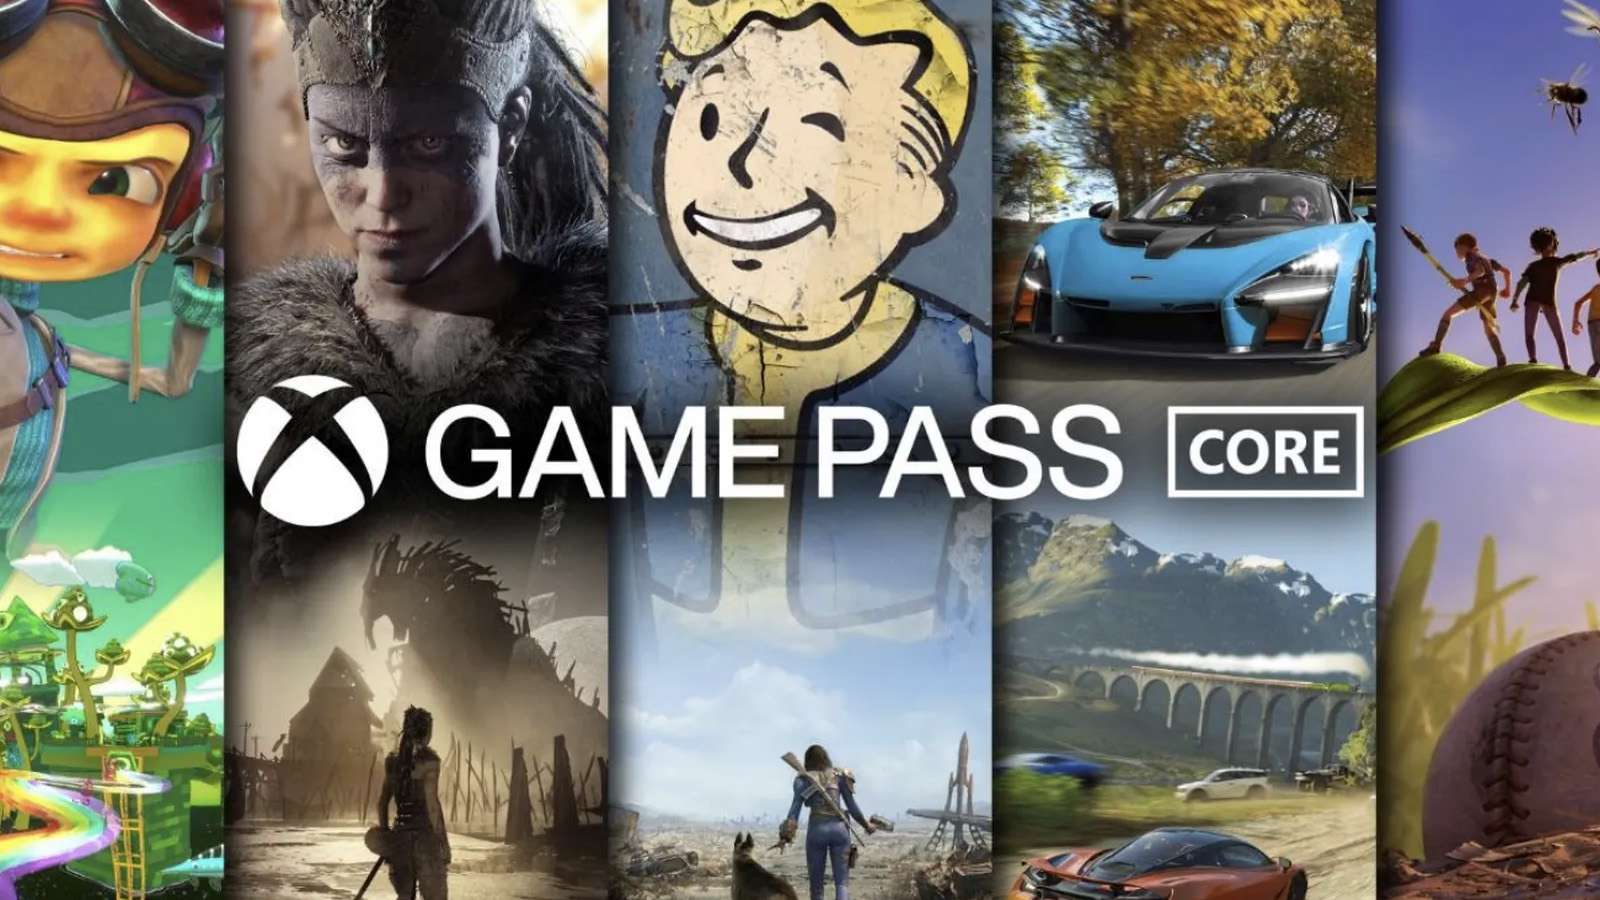 Microsoft employees lose free Xbox Game Pass Ultimate after price increase